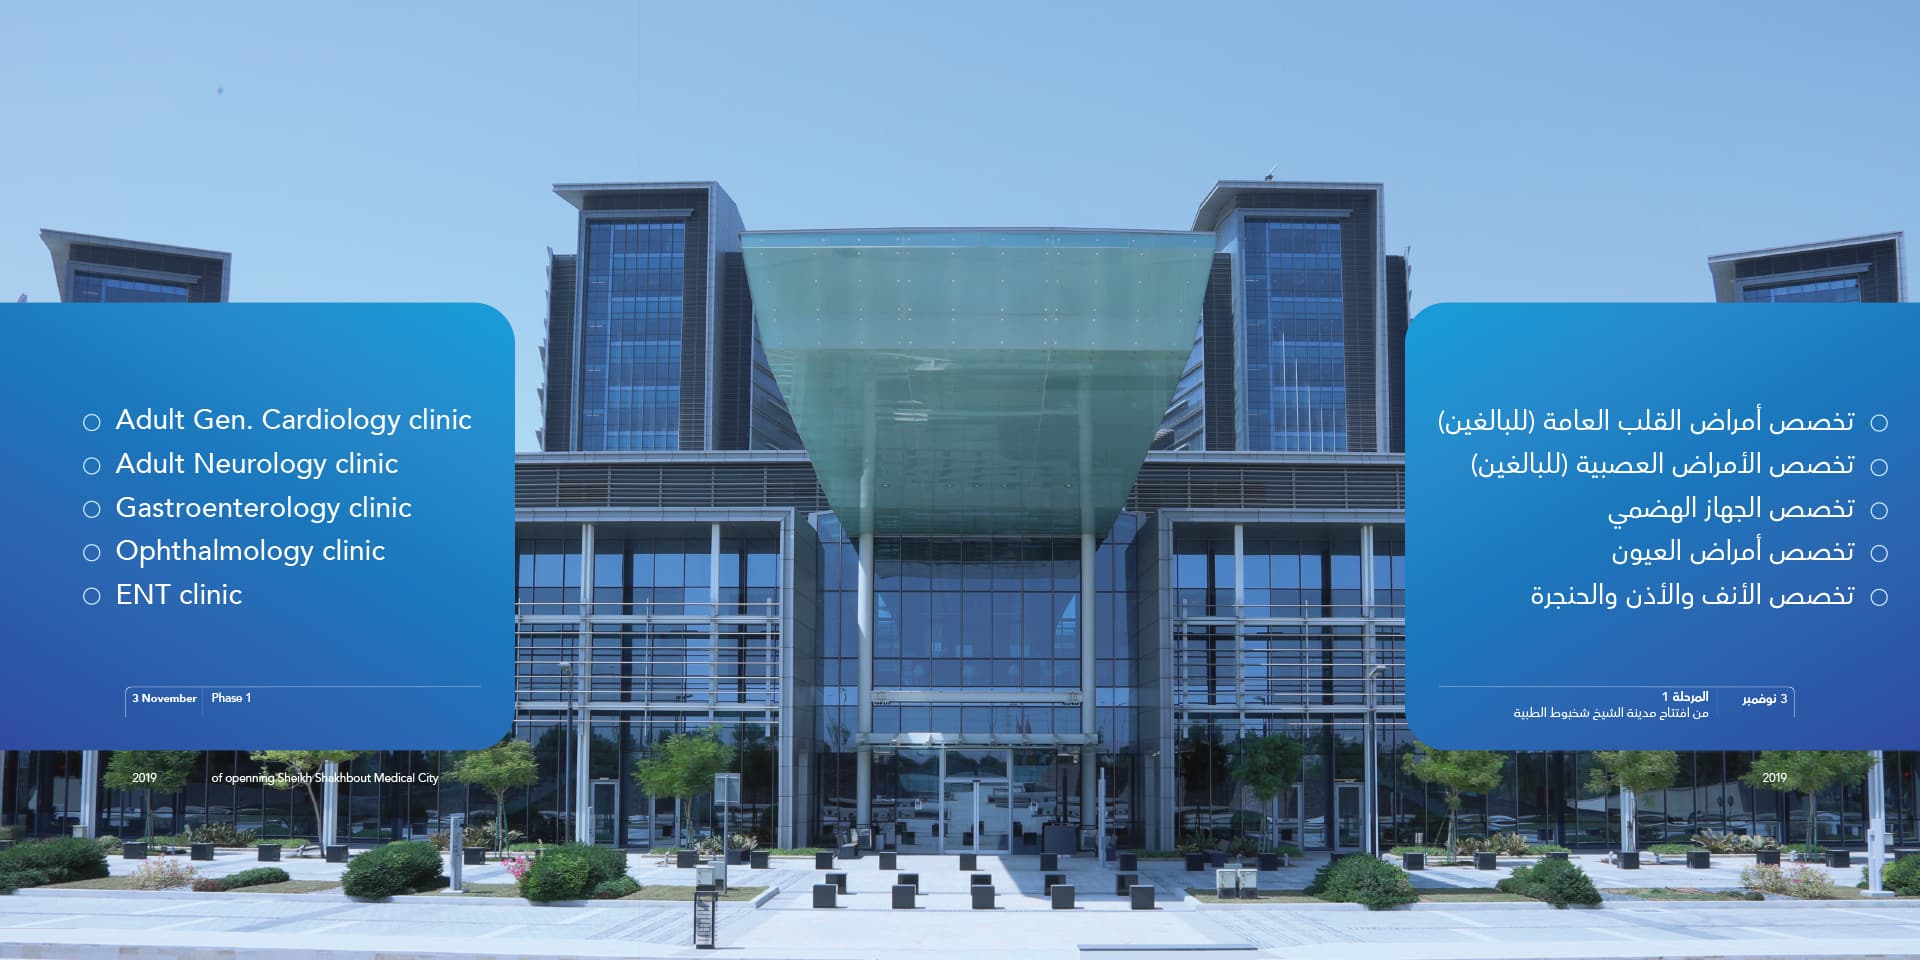 Know more about the phased opening of Sheikh Shakhbout Medical City